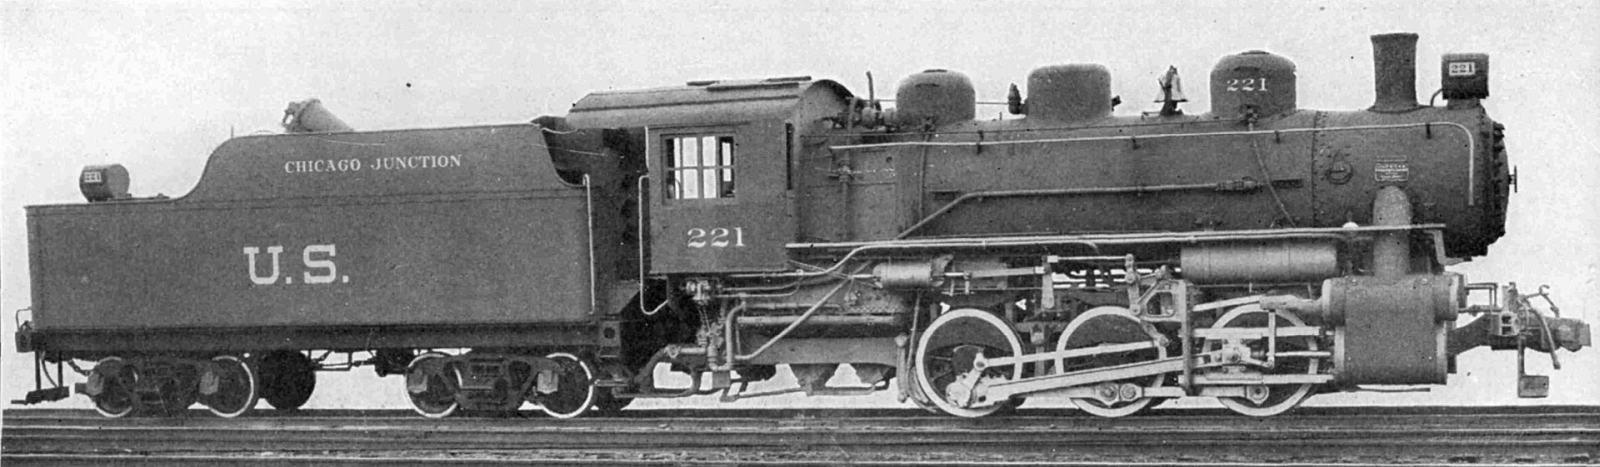 No. 221 of the Chicago Junction, part of New York Central